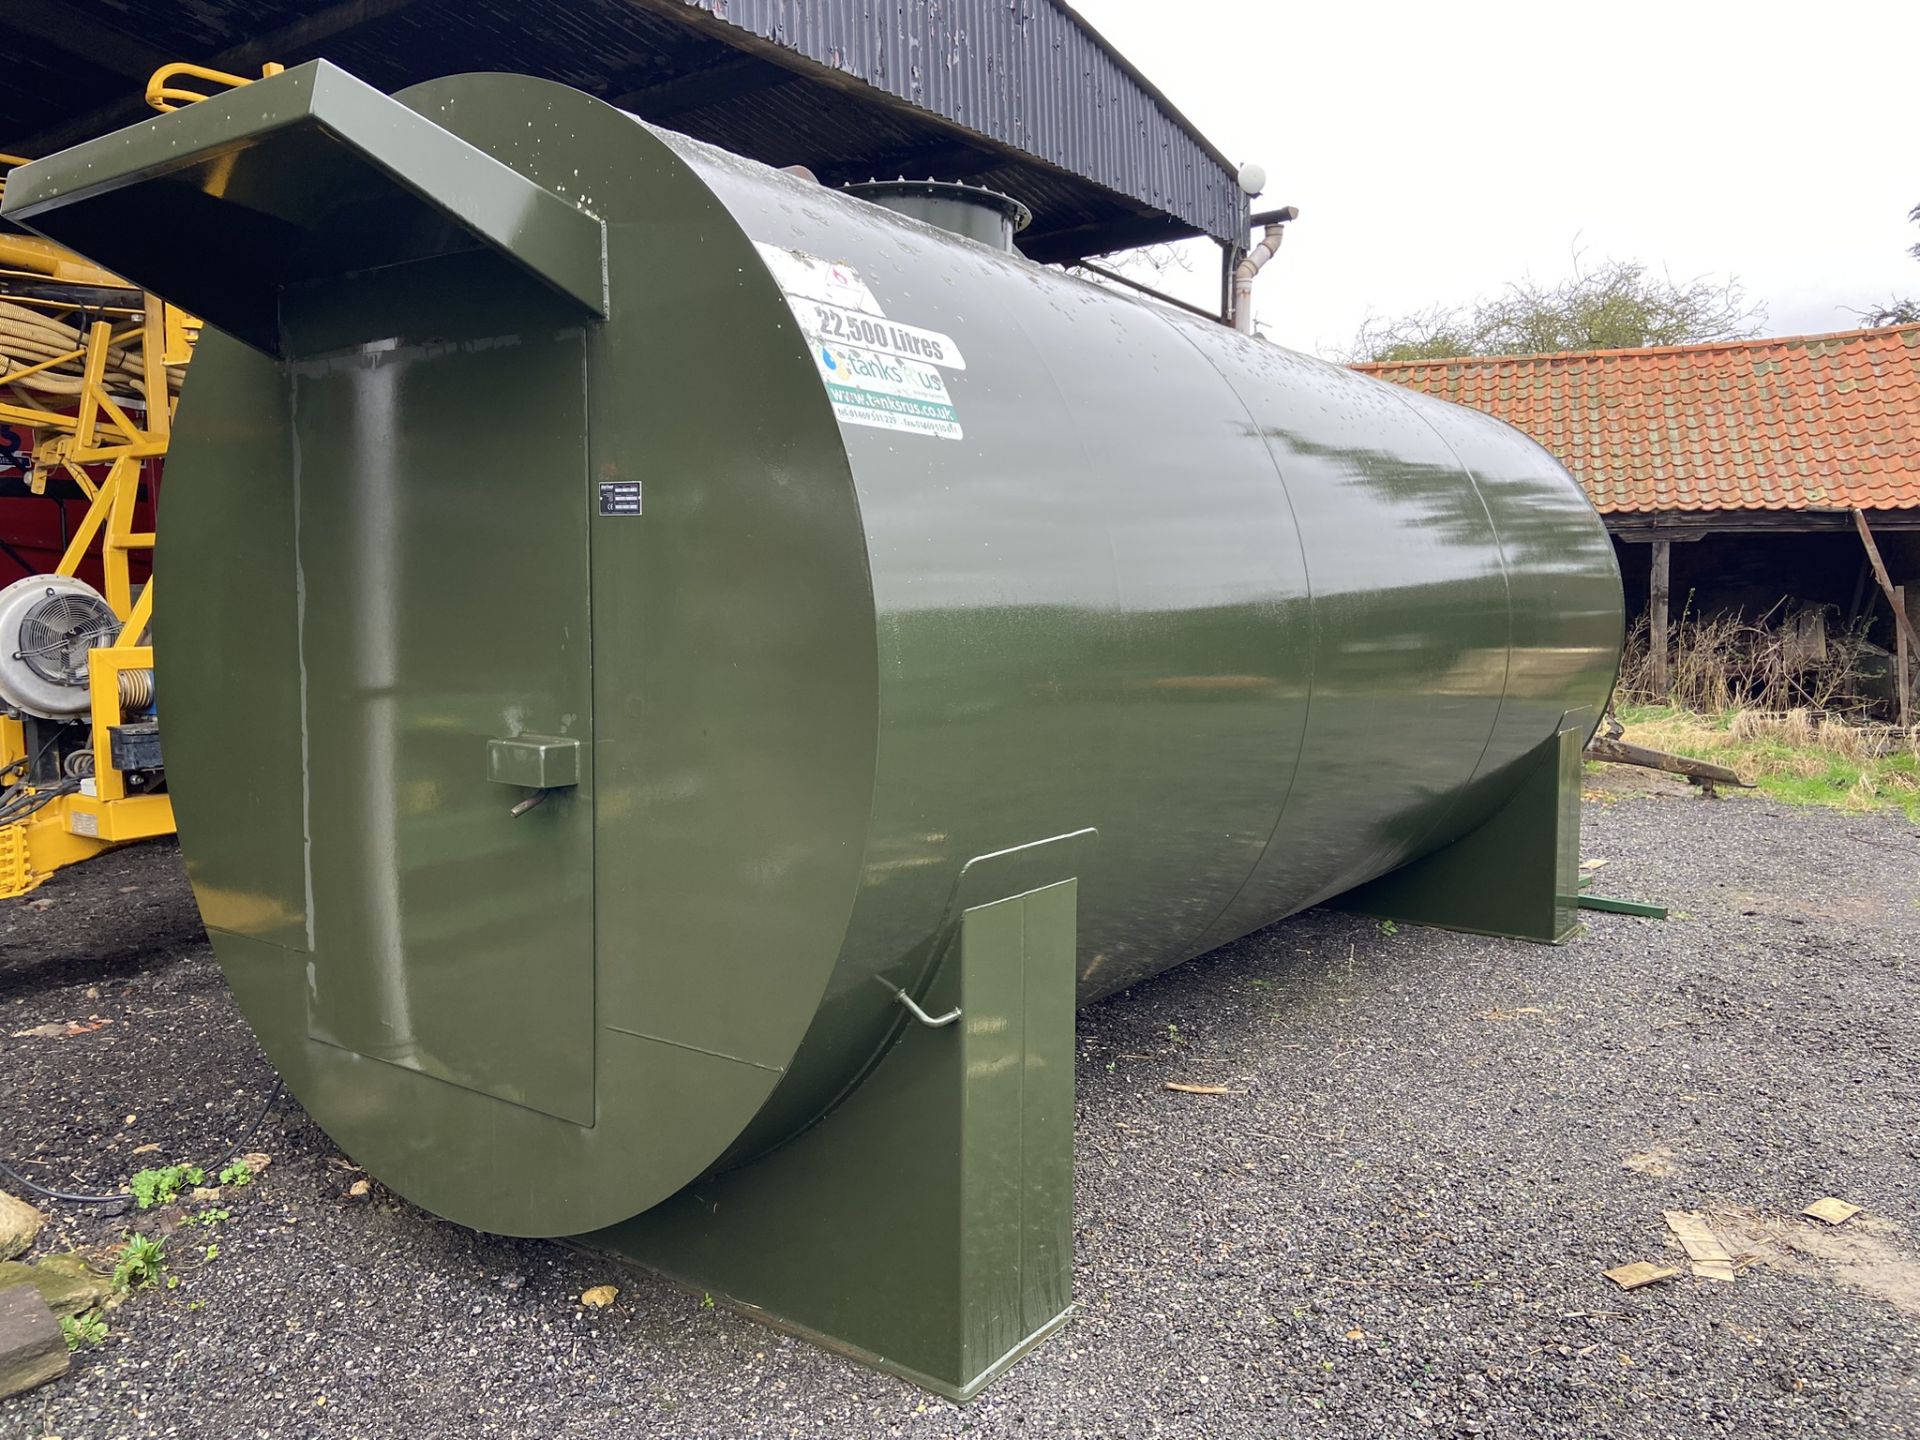 2010 Fuel Proof 22,500 Litre Capacity Lockable Steel Diesel Tank S/No. 9773, with Fast Delivery Hose